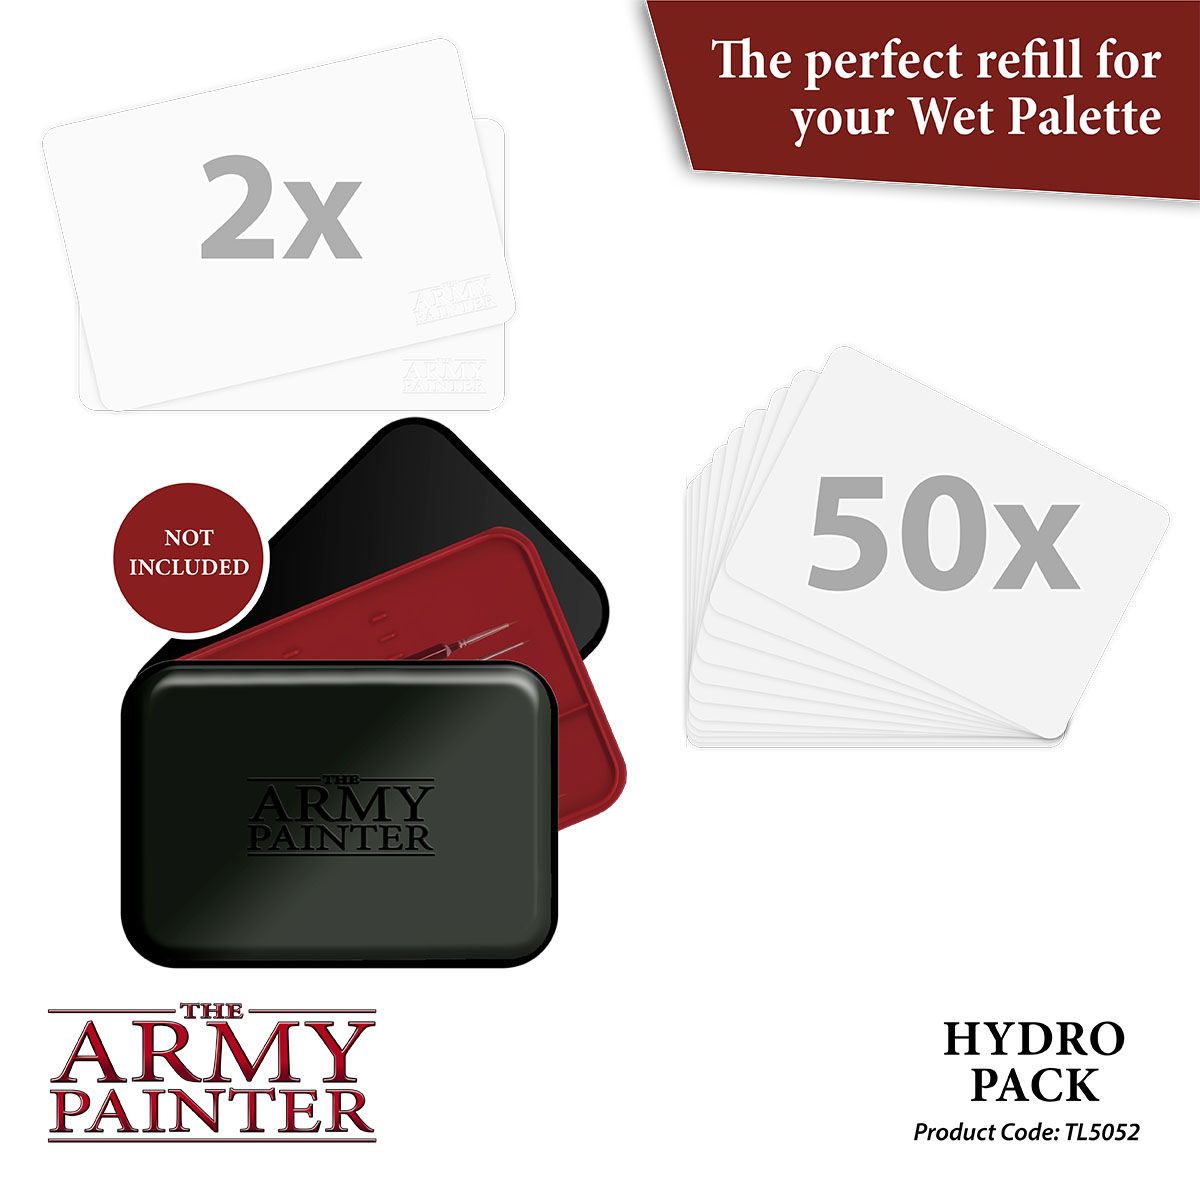 Army Painter: Wet Palette Hydro Pack (refill)